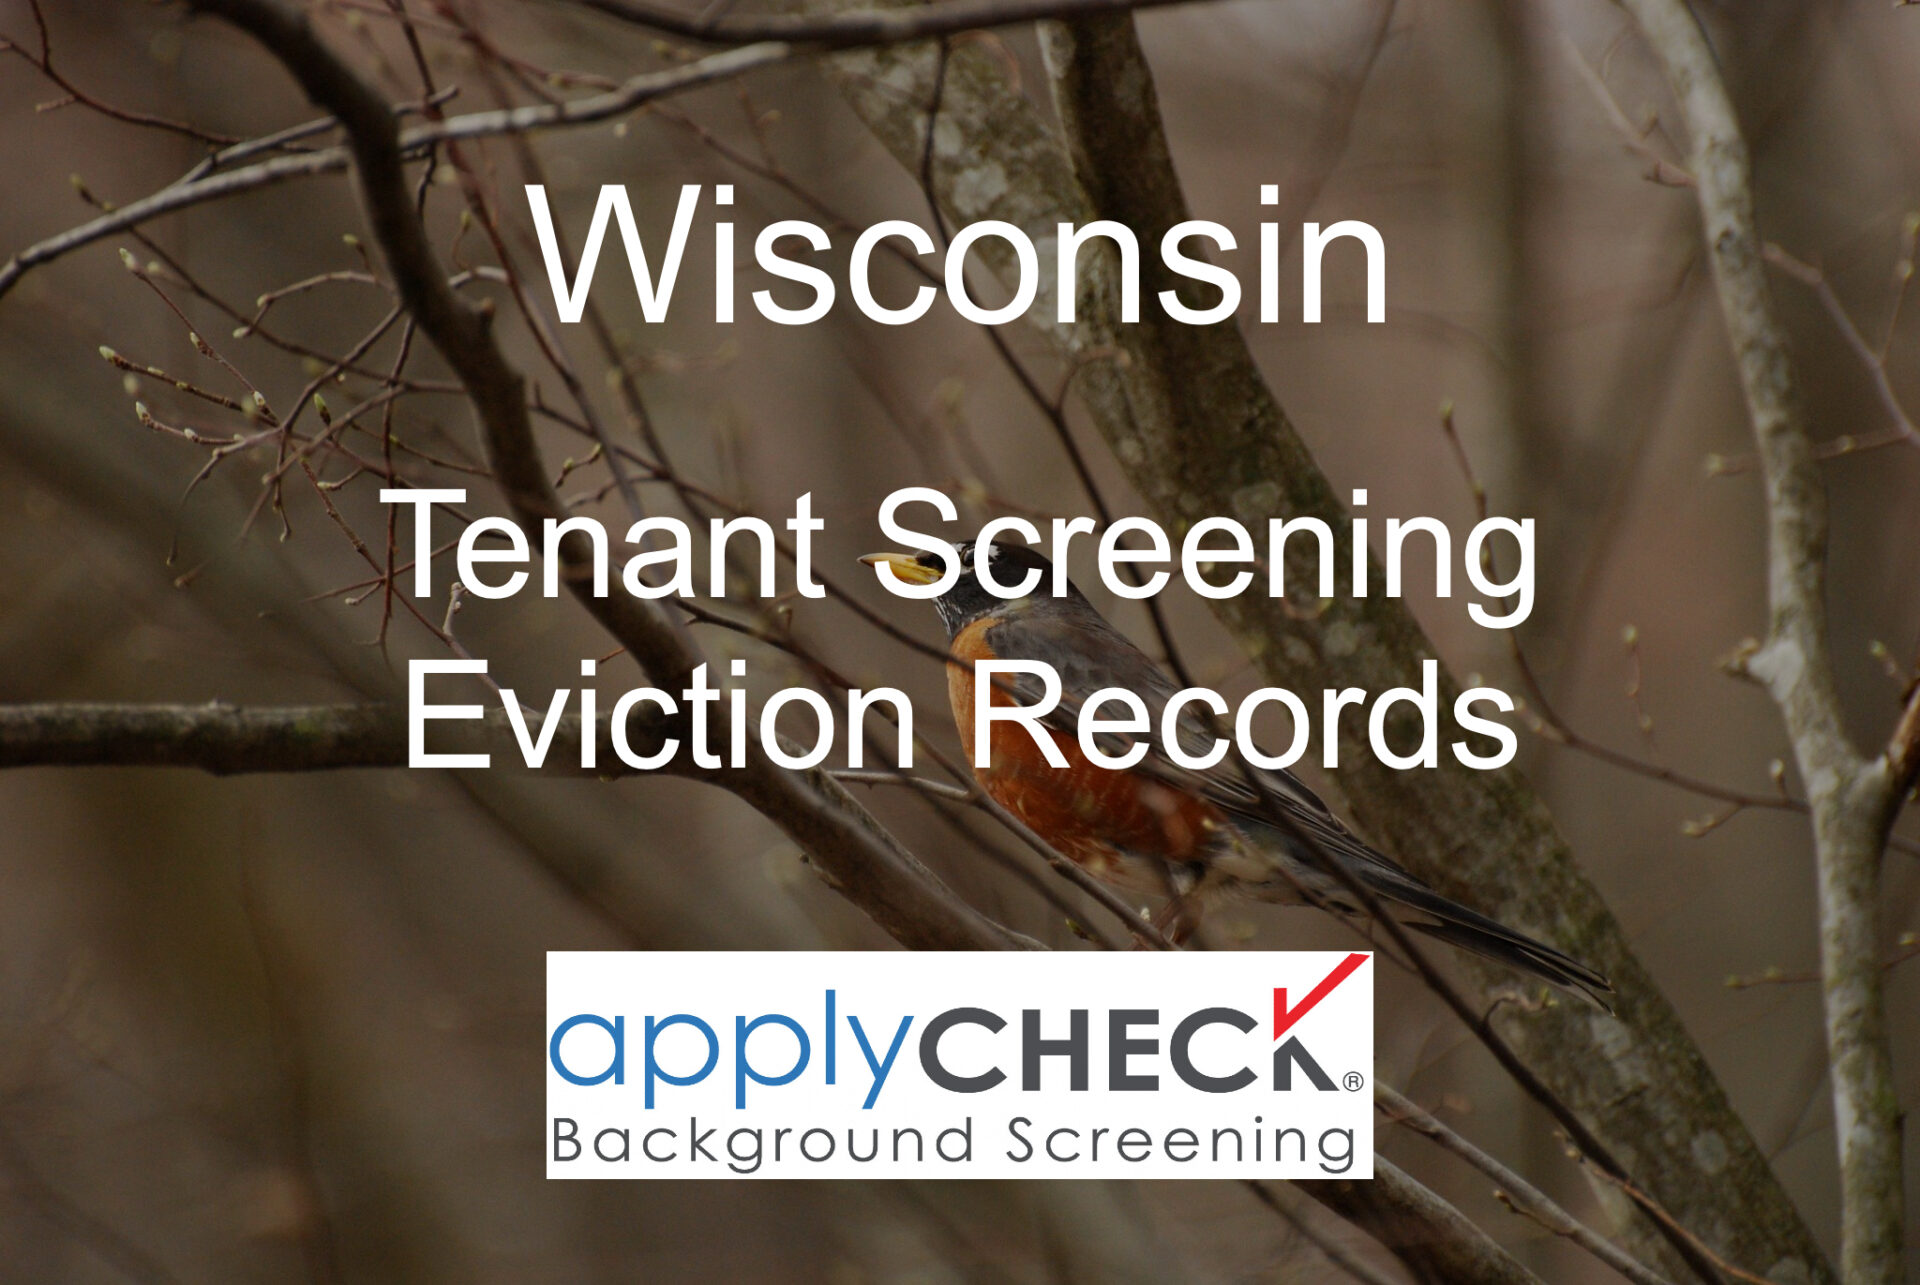 Wisconsin Tenant screening and eviction image